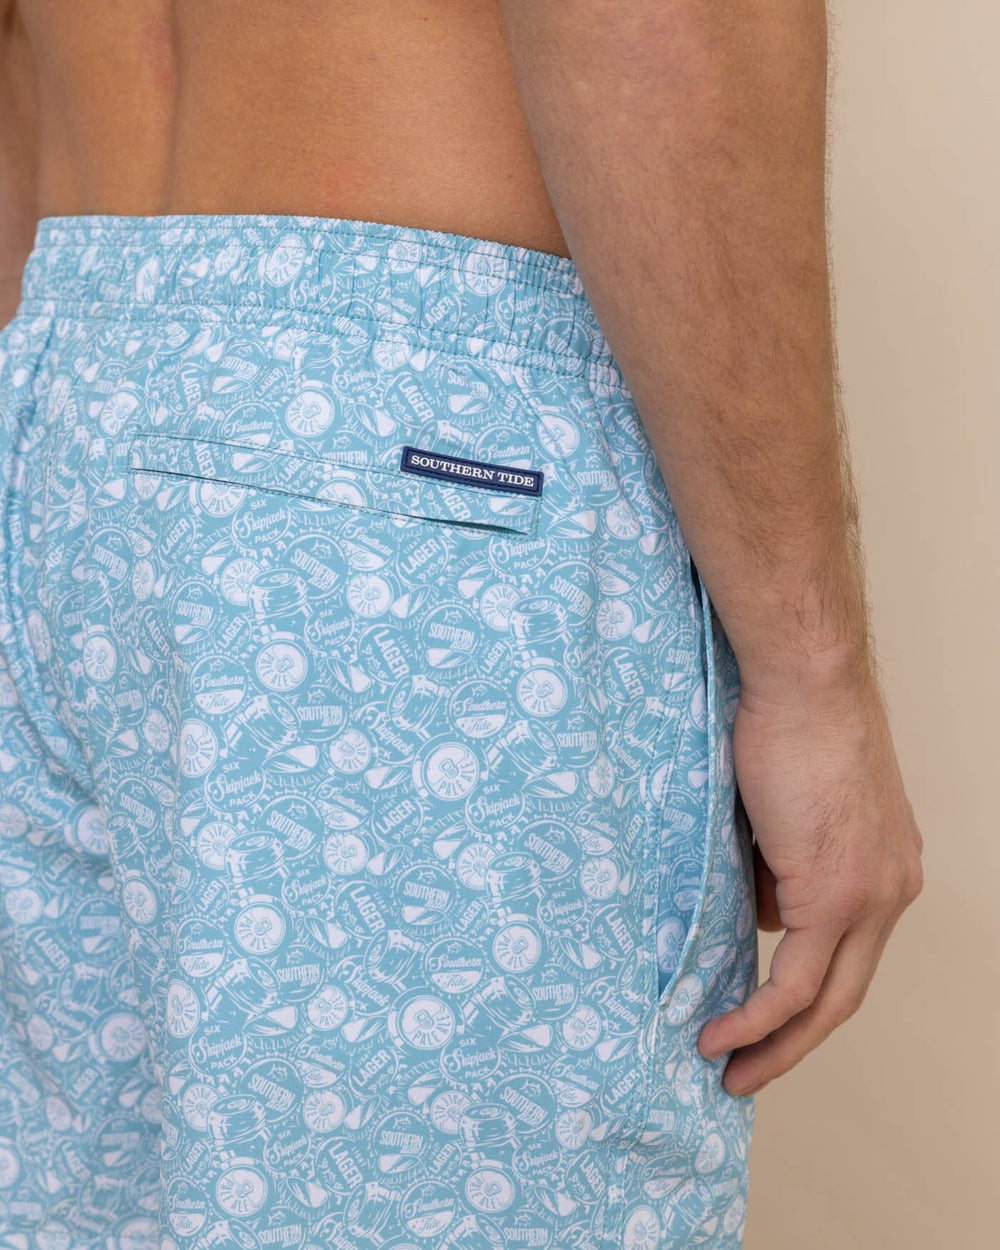 The detail view of the Southern Tide Caps Off Swim Trunk by Southern Tide - Marine Blue